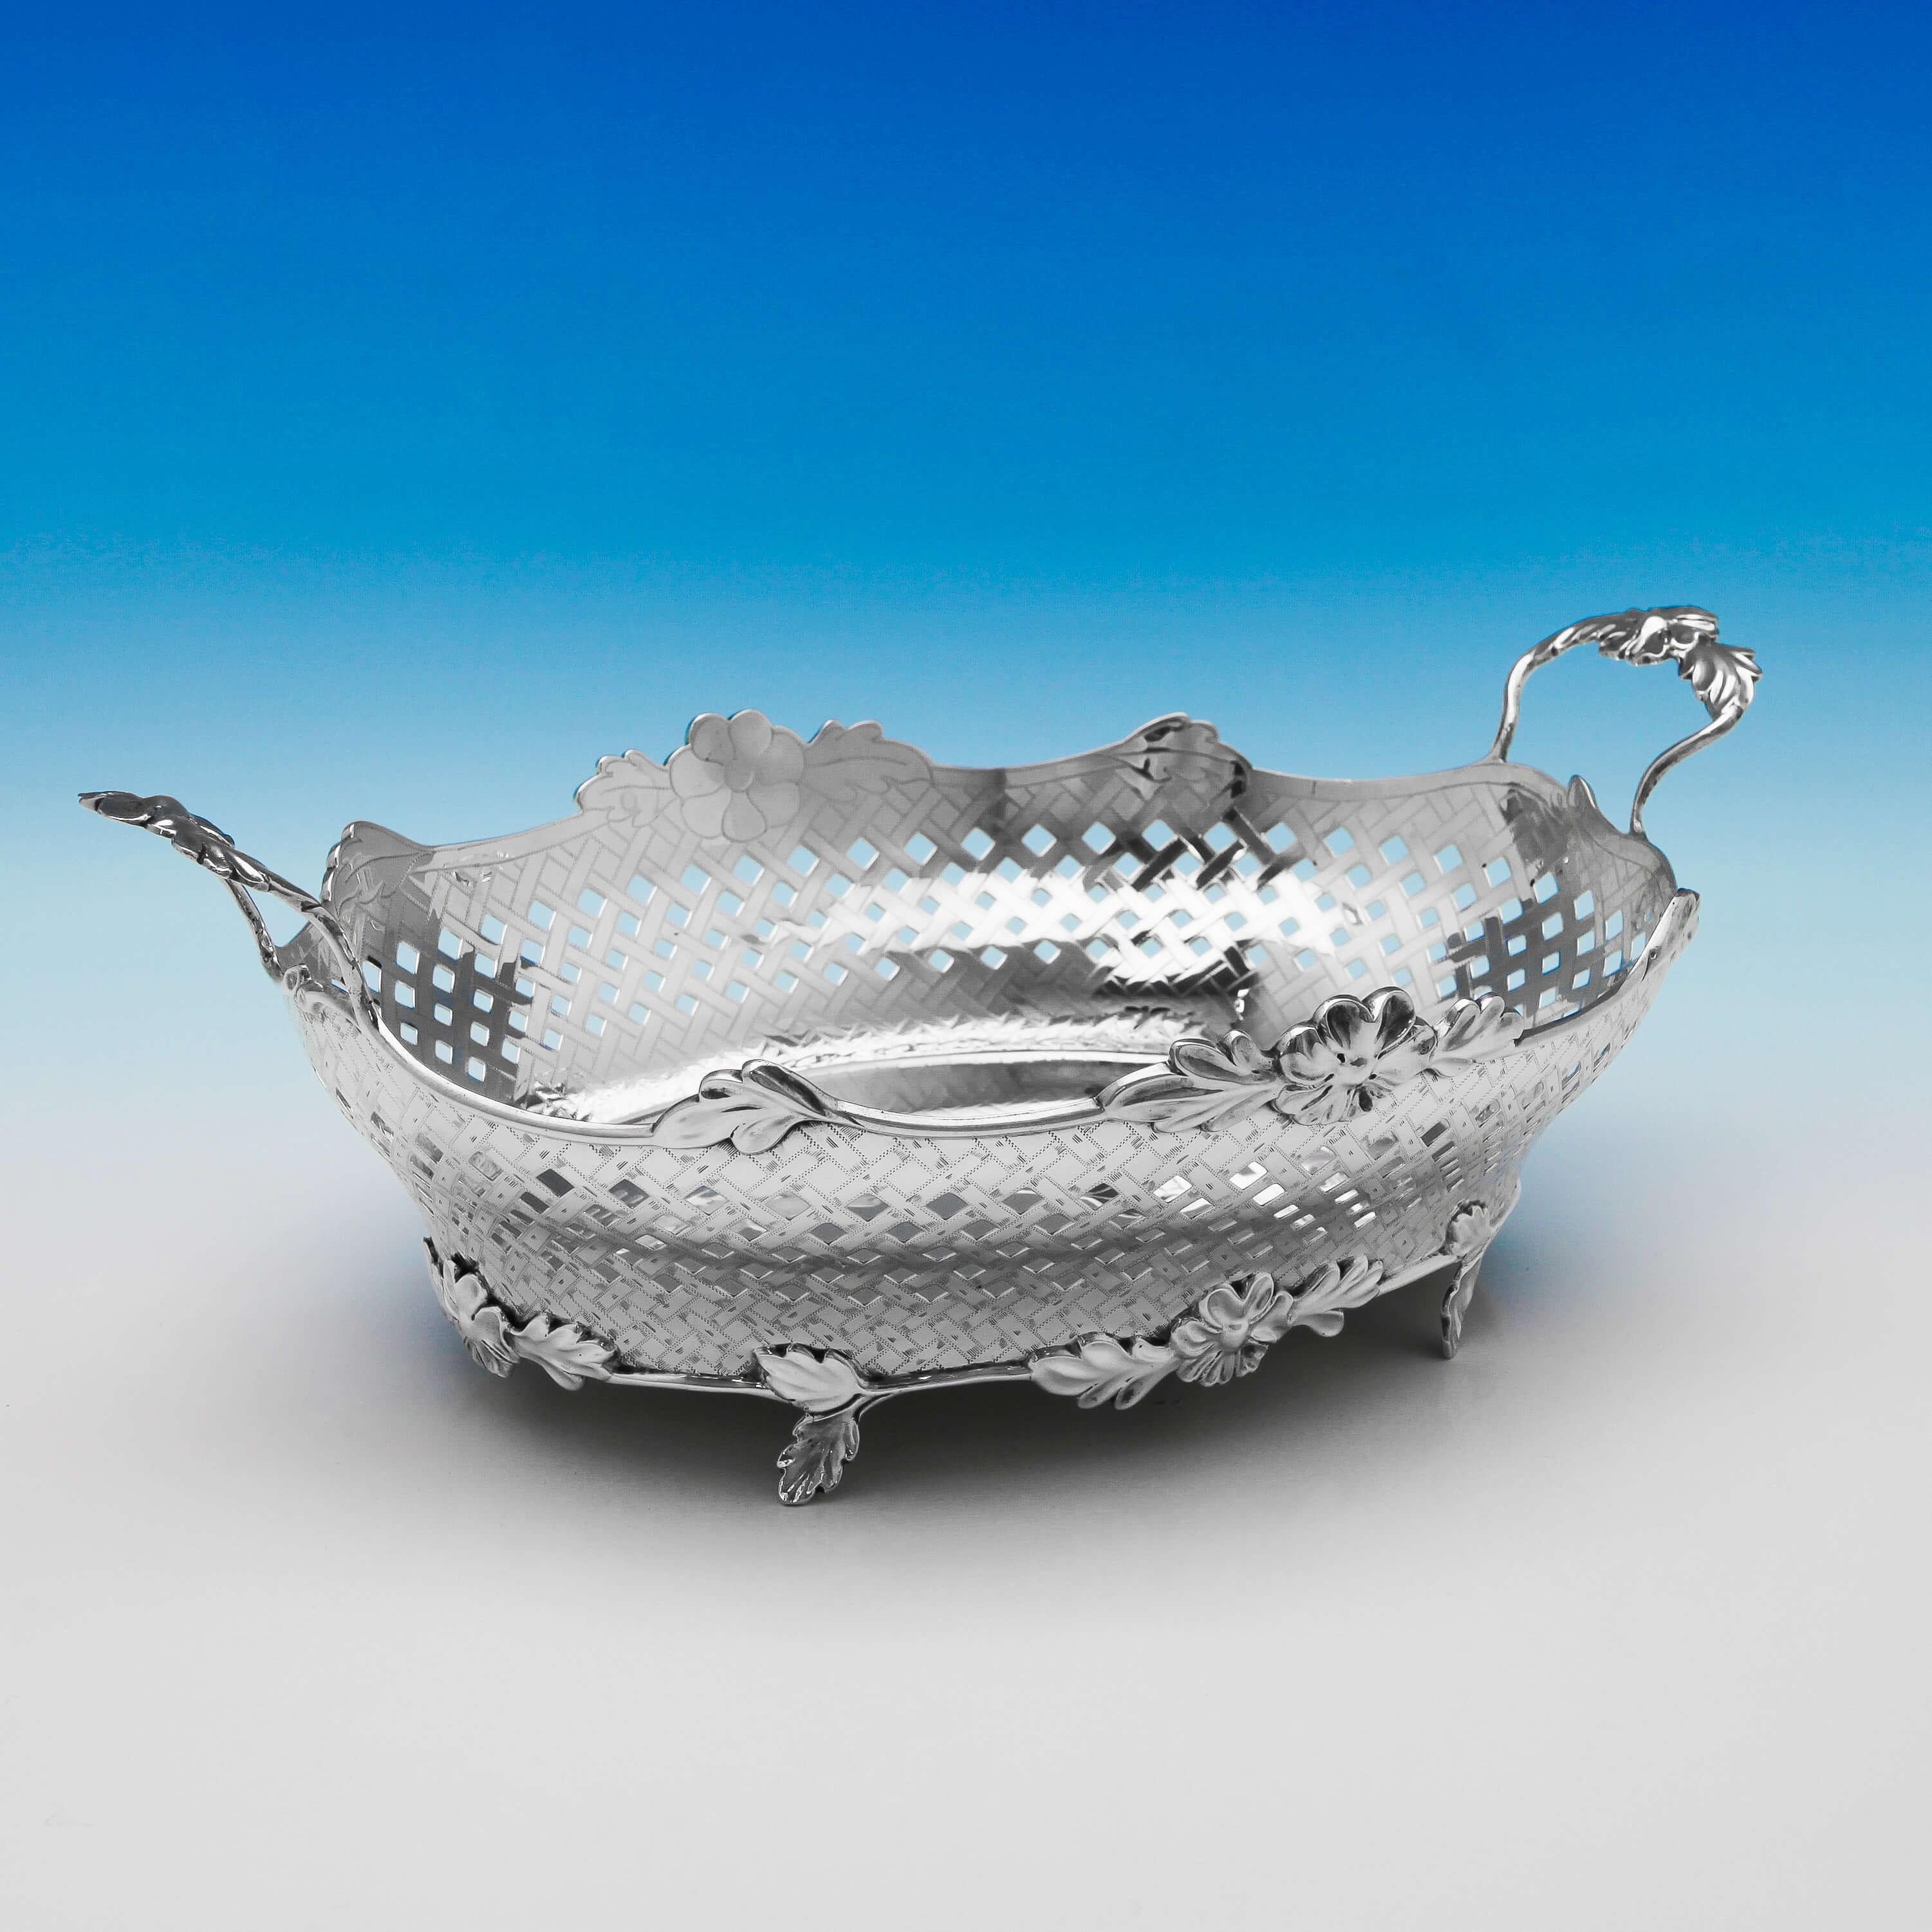 Hallmarked in London, 1898 by Charles Stuart Harris, this stylish, Victorian, antique, sterling silver basket, stands on cast naturalistic feet, and features a basket weave finish to the body, and cast and applied handles. The basket measures 5.25